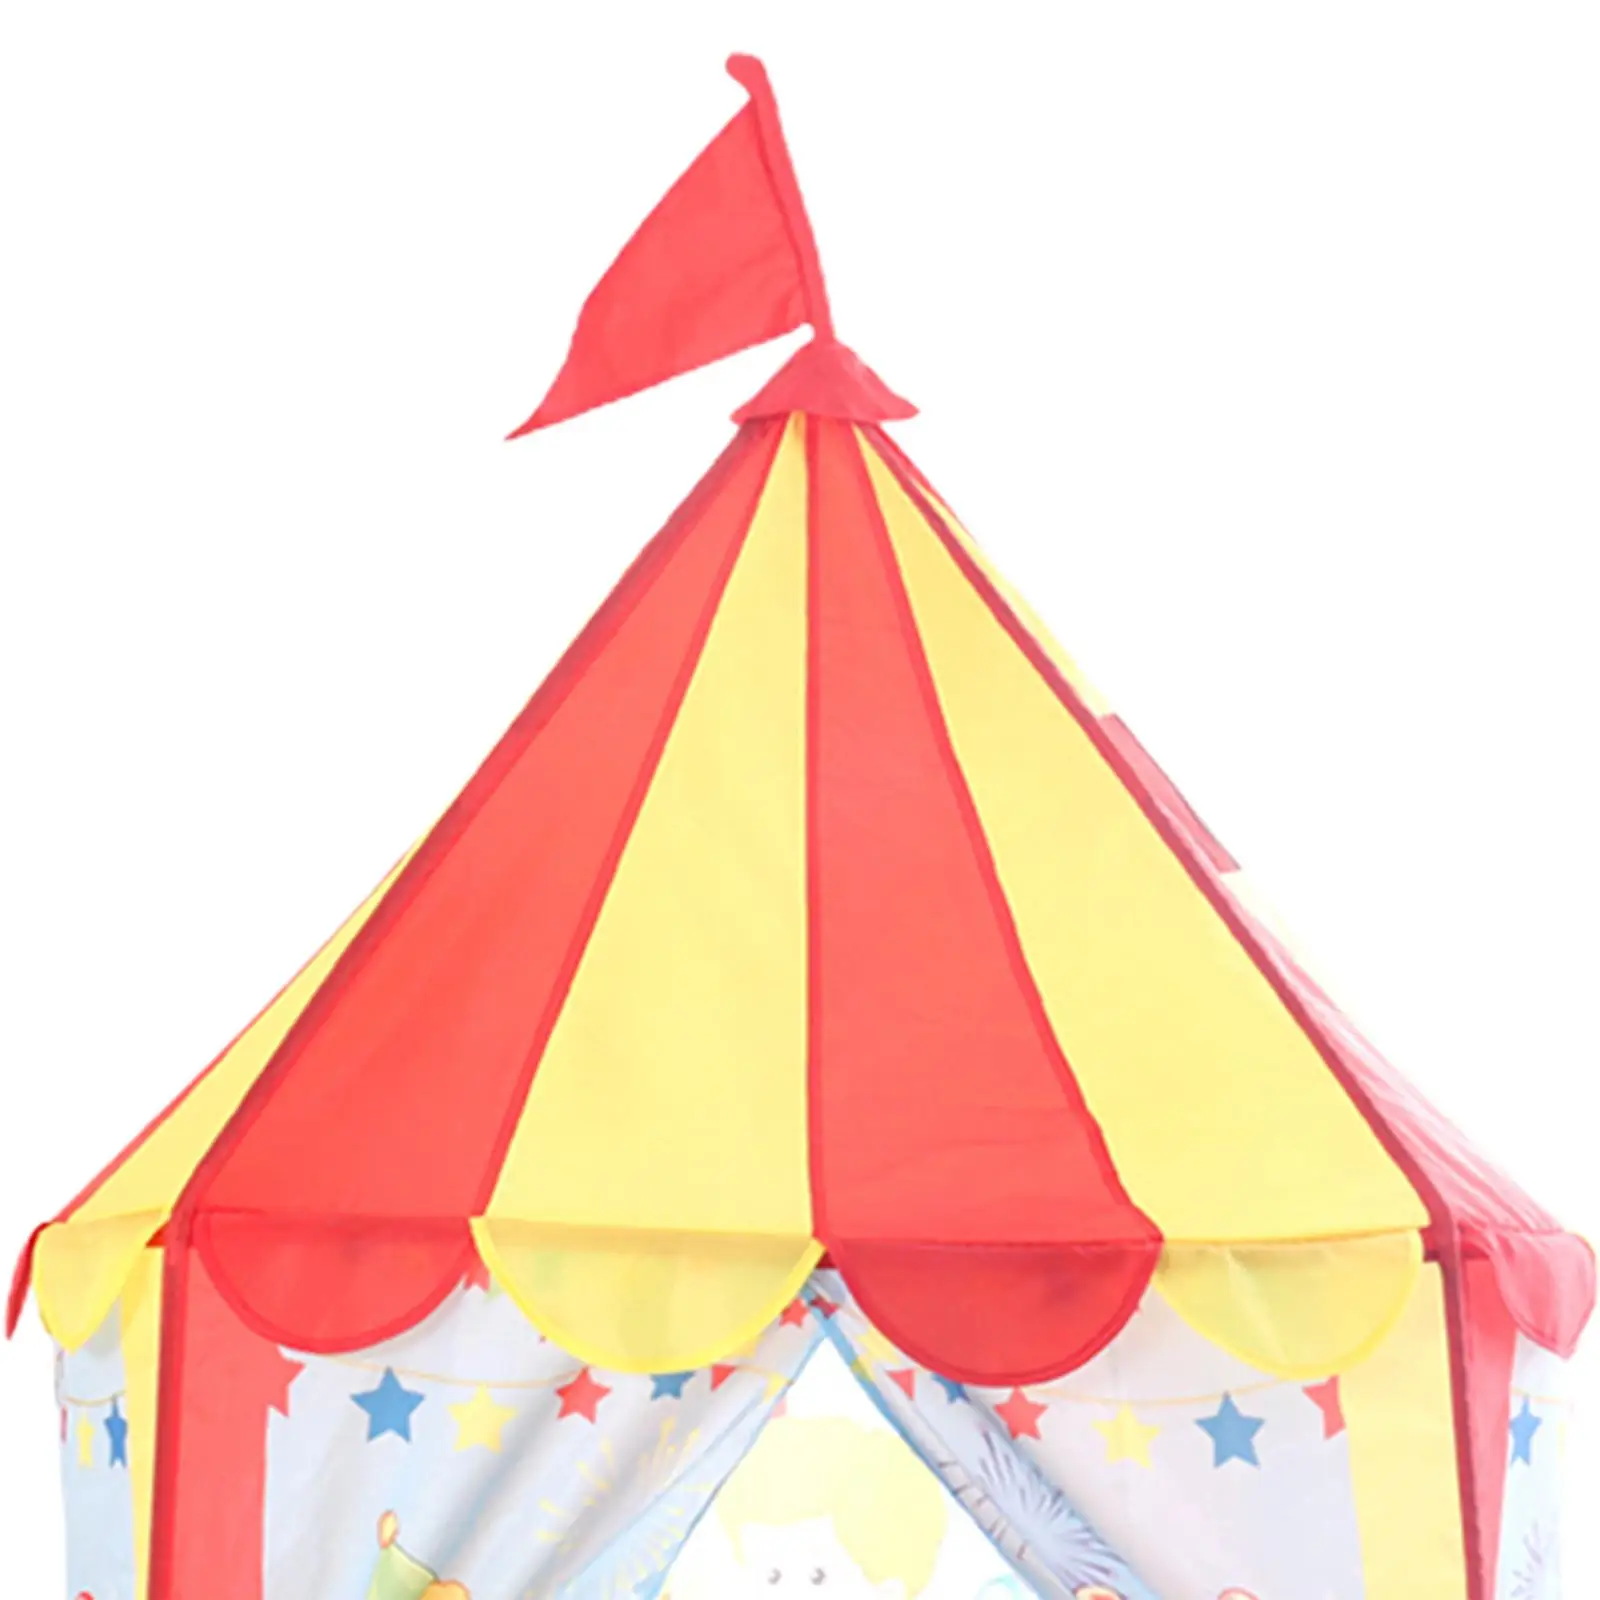 Play Tent House Portable Birthday Gift Kids Playhouse for Games Camping Home